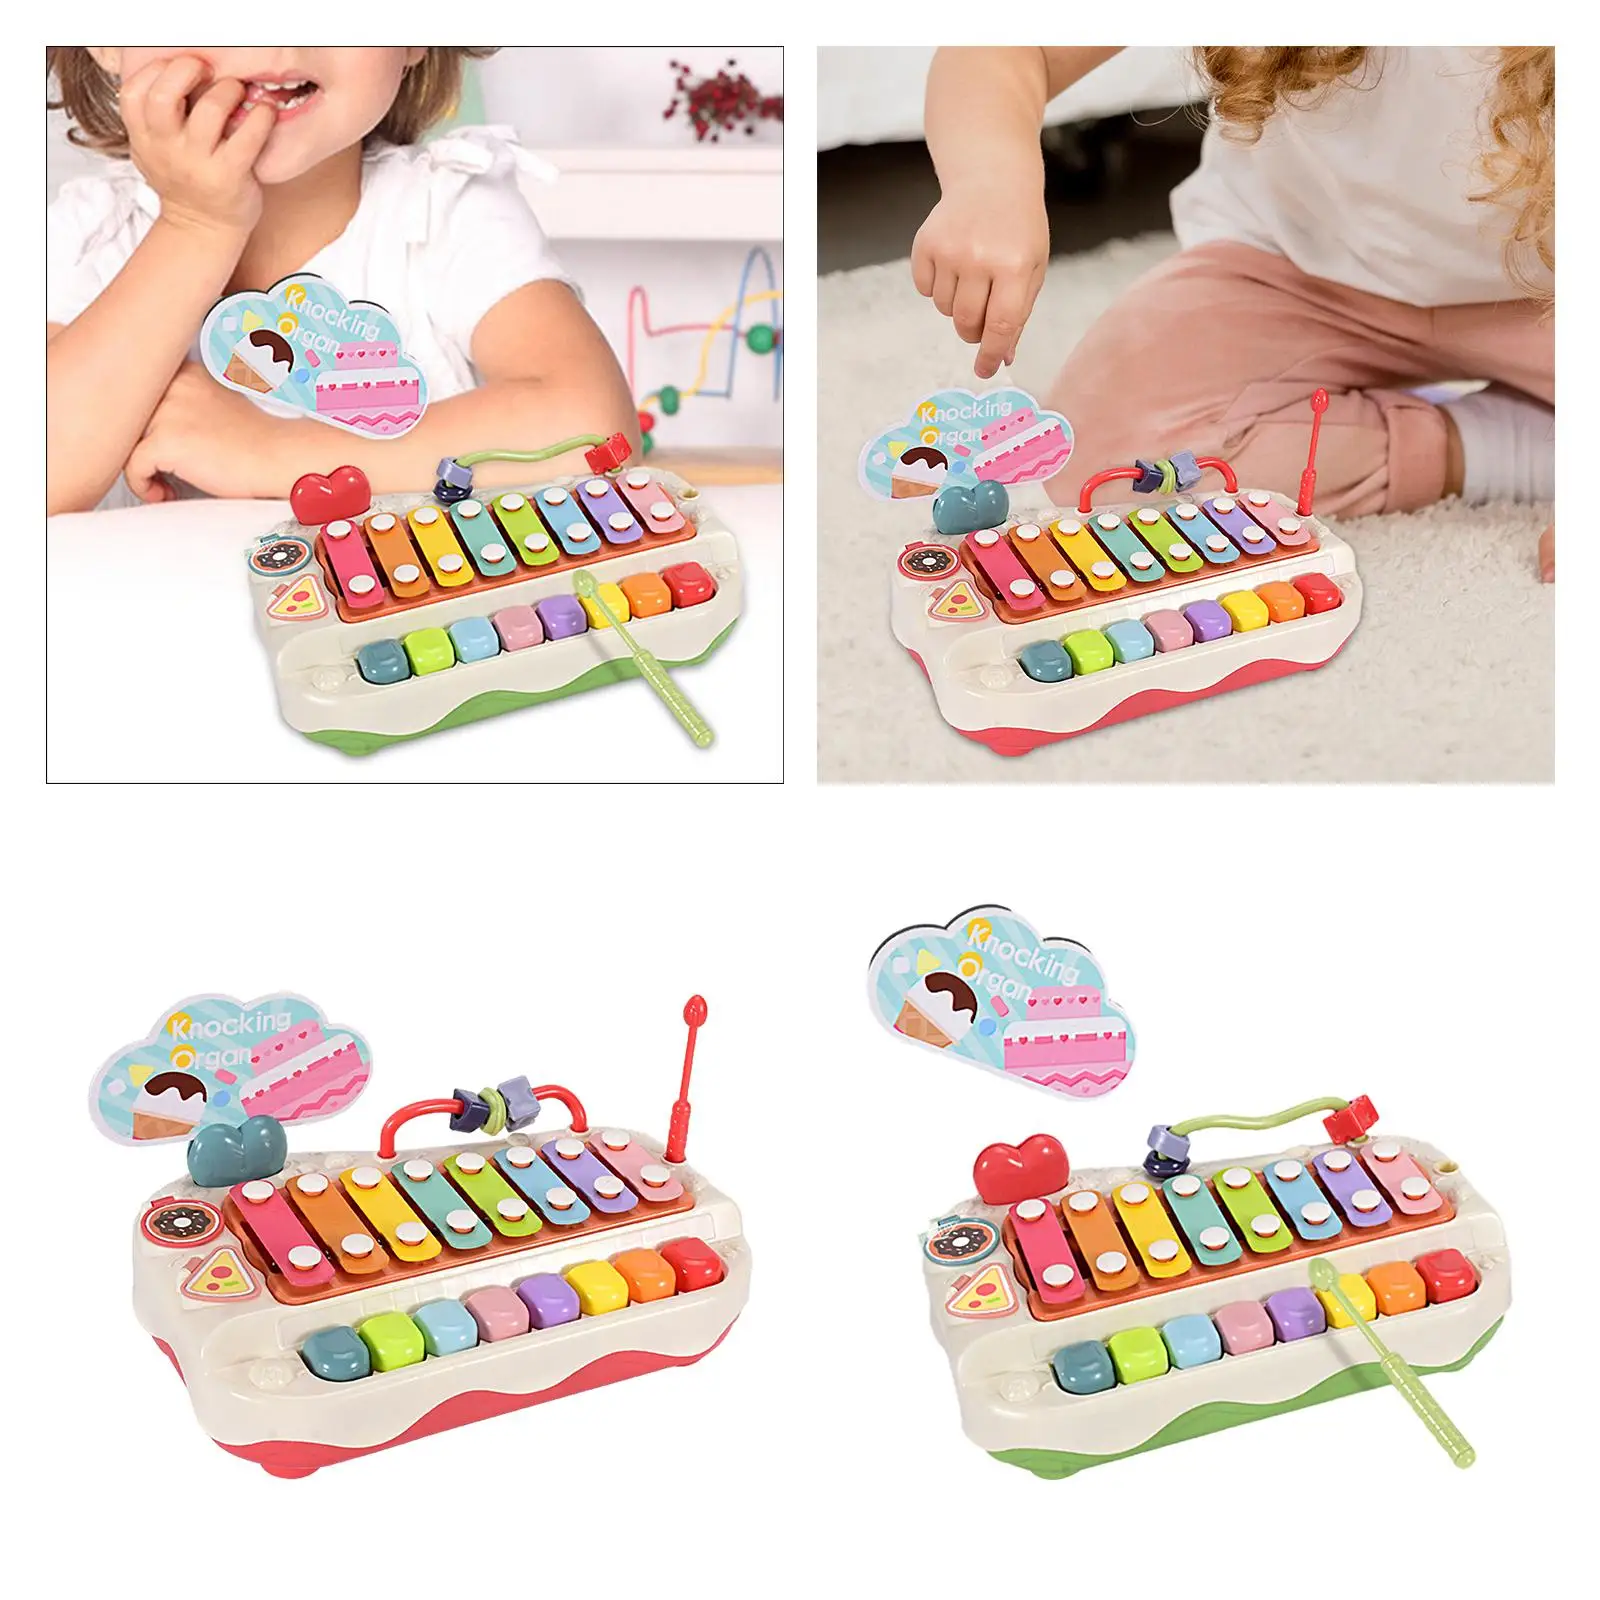 Kids Musical Toy Educational Montessori Learning Toy Musical Instrument Toy for Baby 1 2 3 Years Old Kids Toddler Birthday Gift